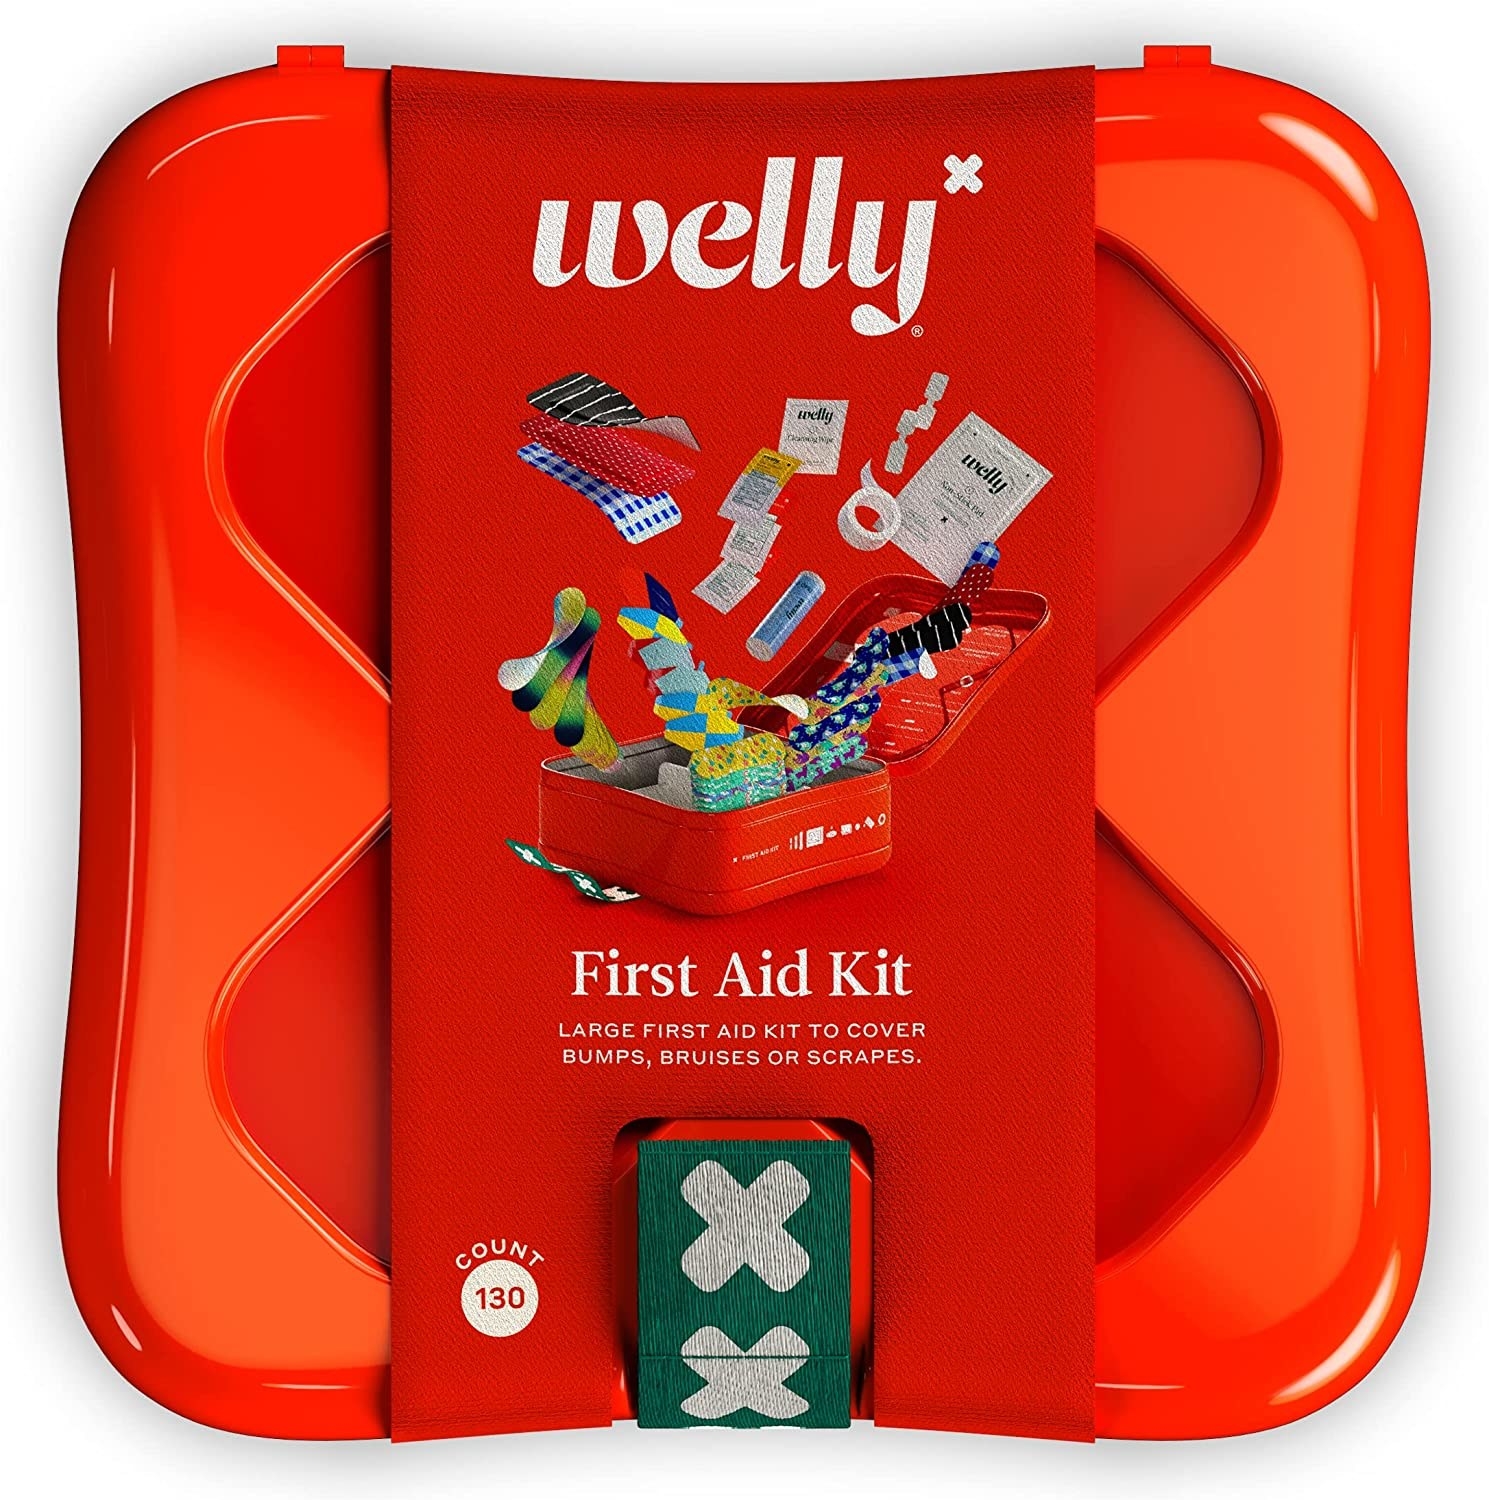 The red first aid kit